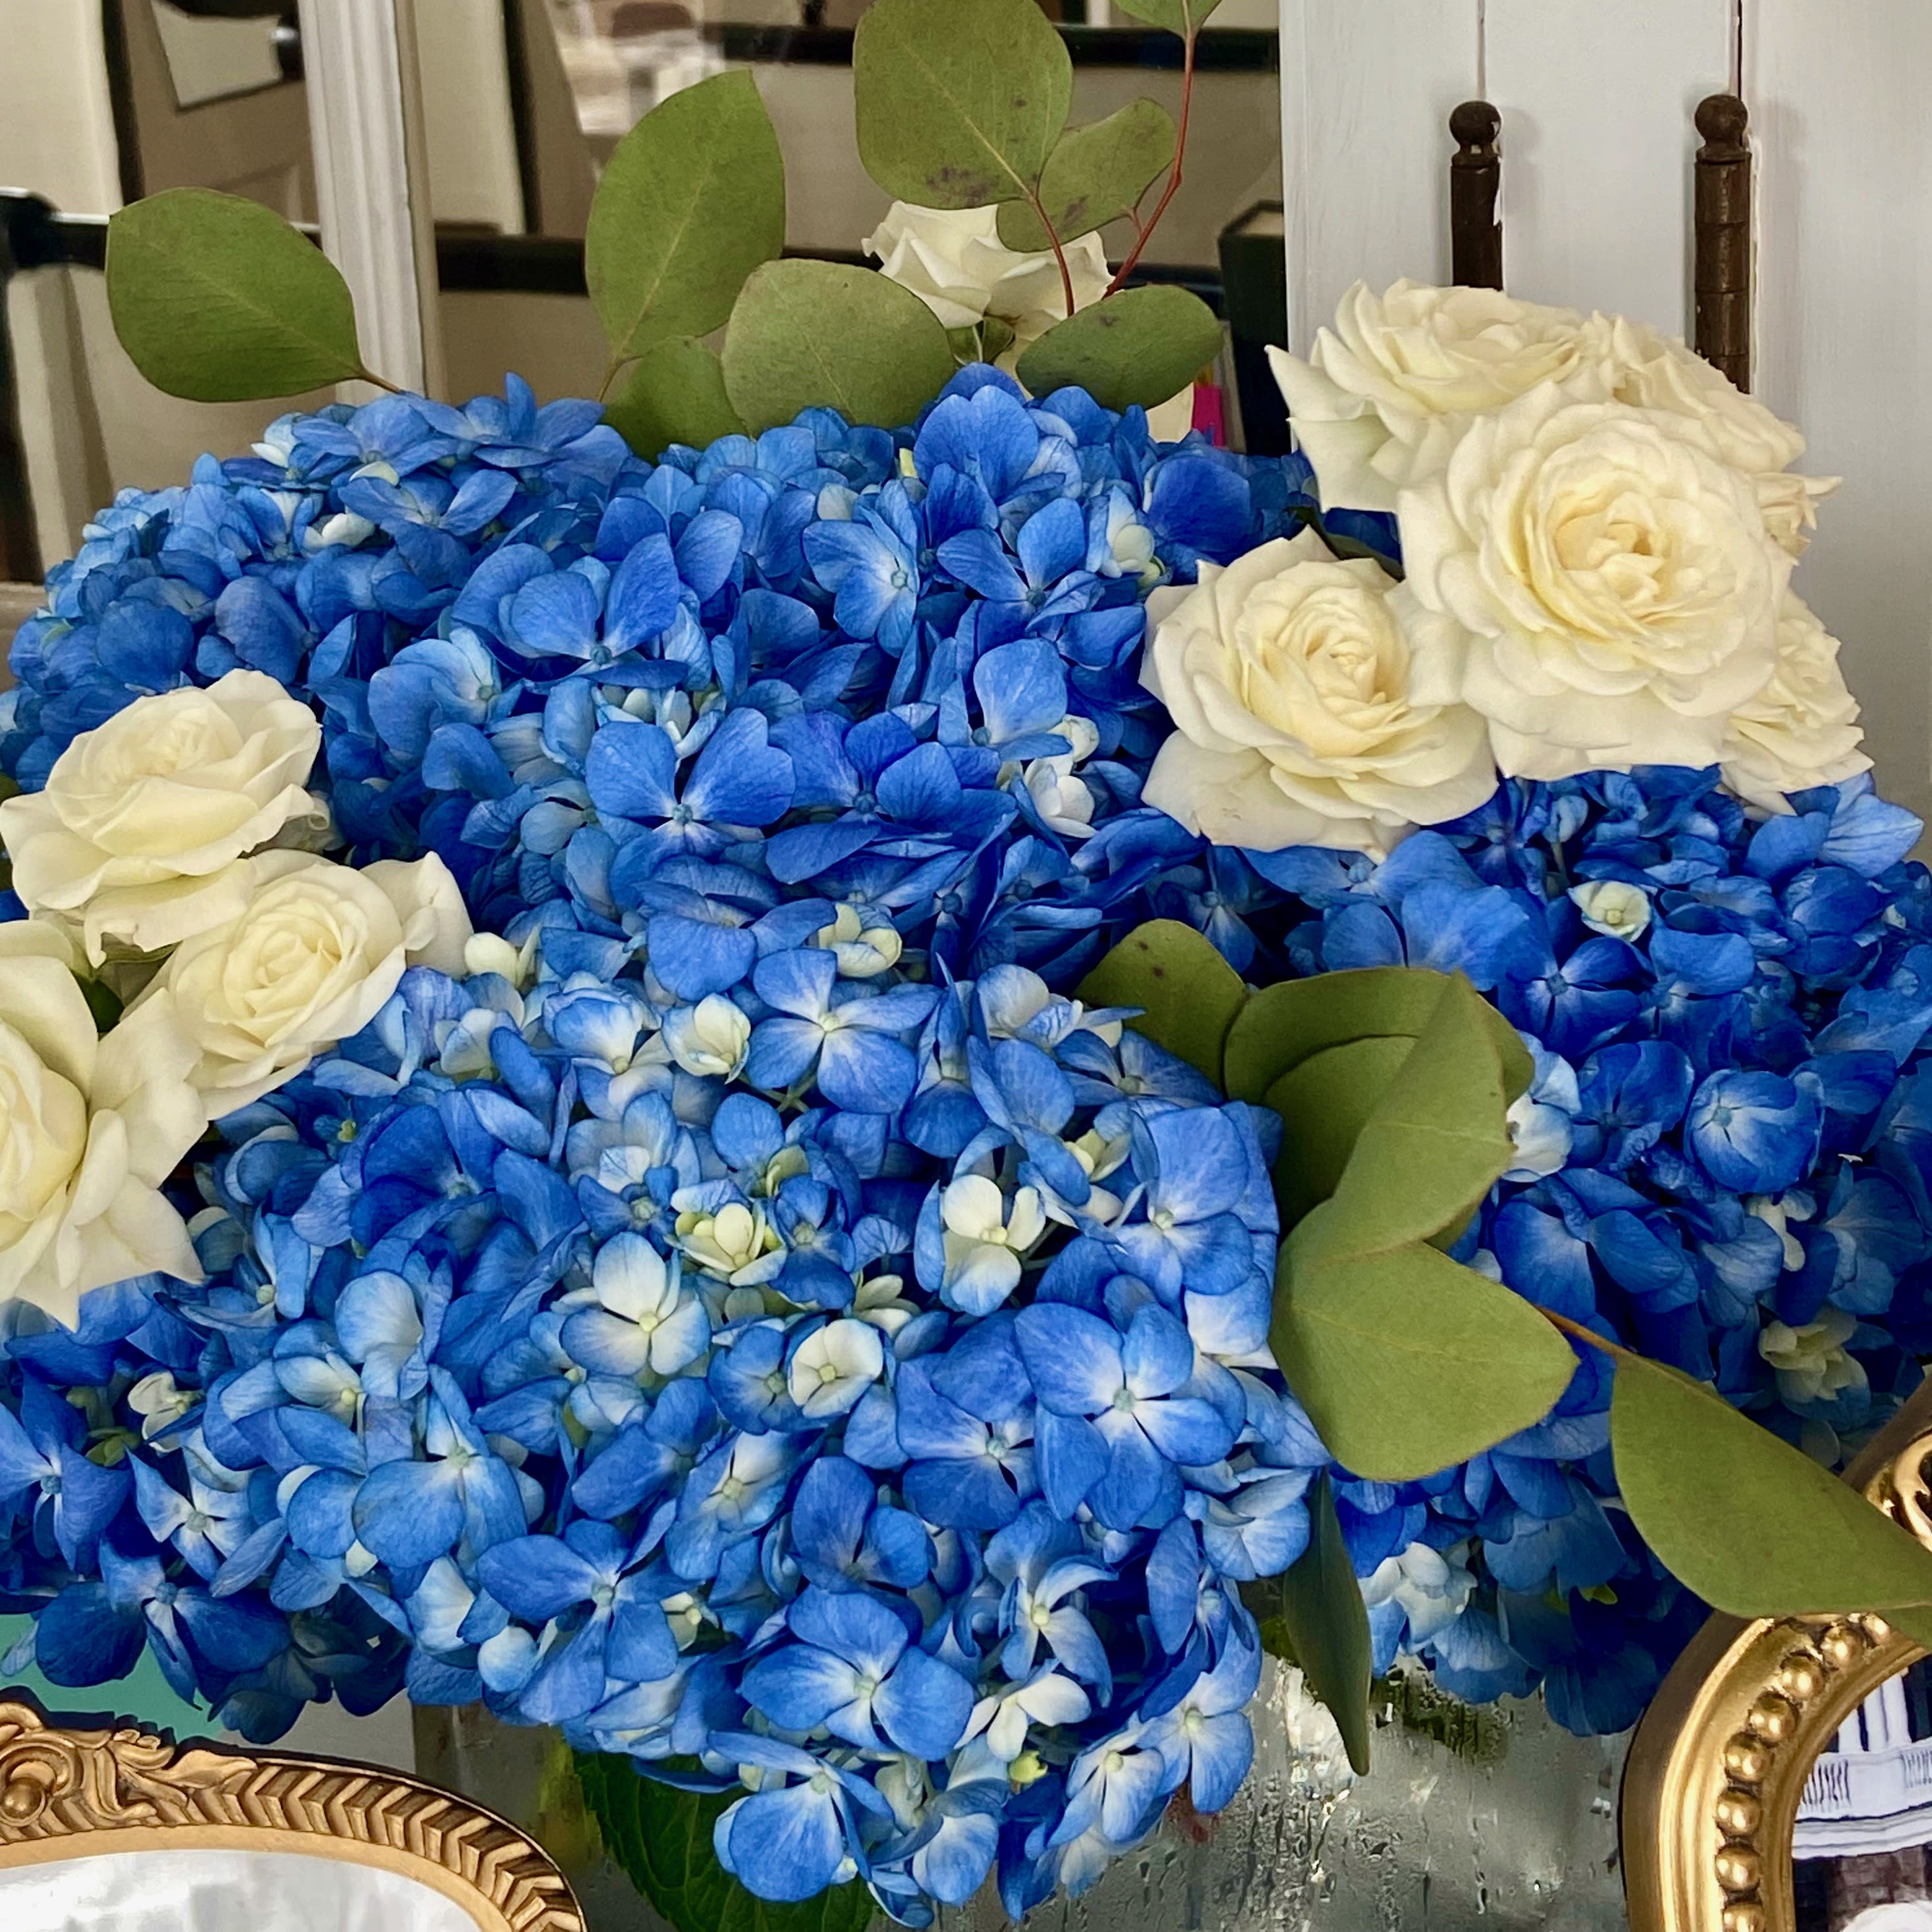 Blue Blooms - This beautiful mix of vibrant blue hydrangea and white garden roses is a blue lover's dream bouquet.  Perfect for all your summertime celebrations!